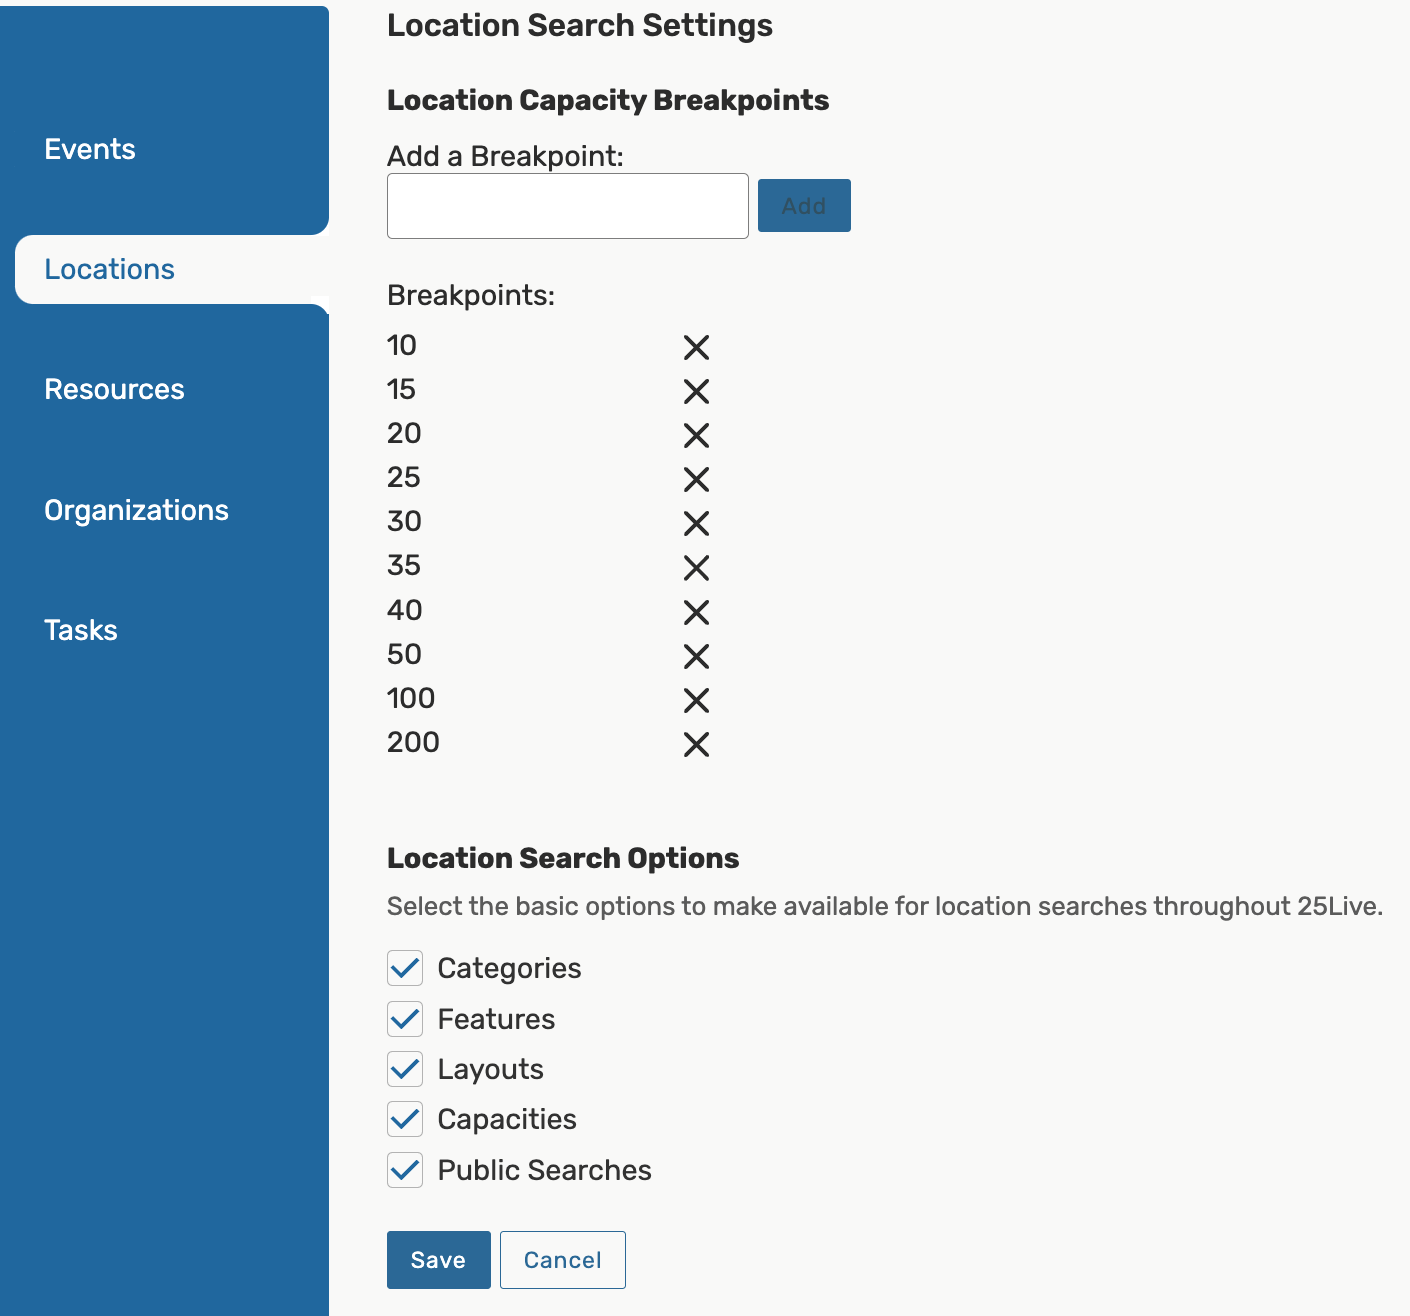 Search Settings - Locations